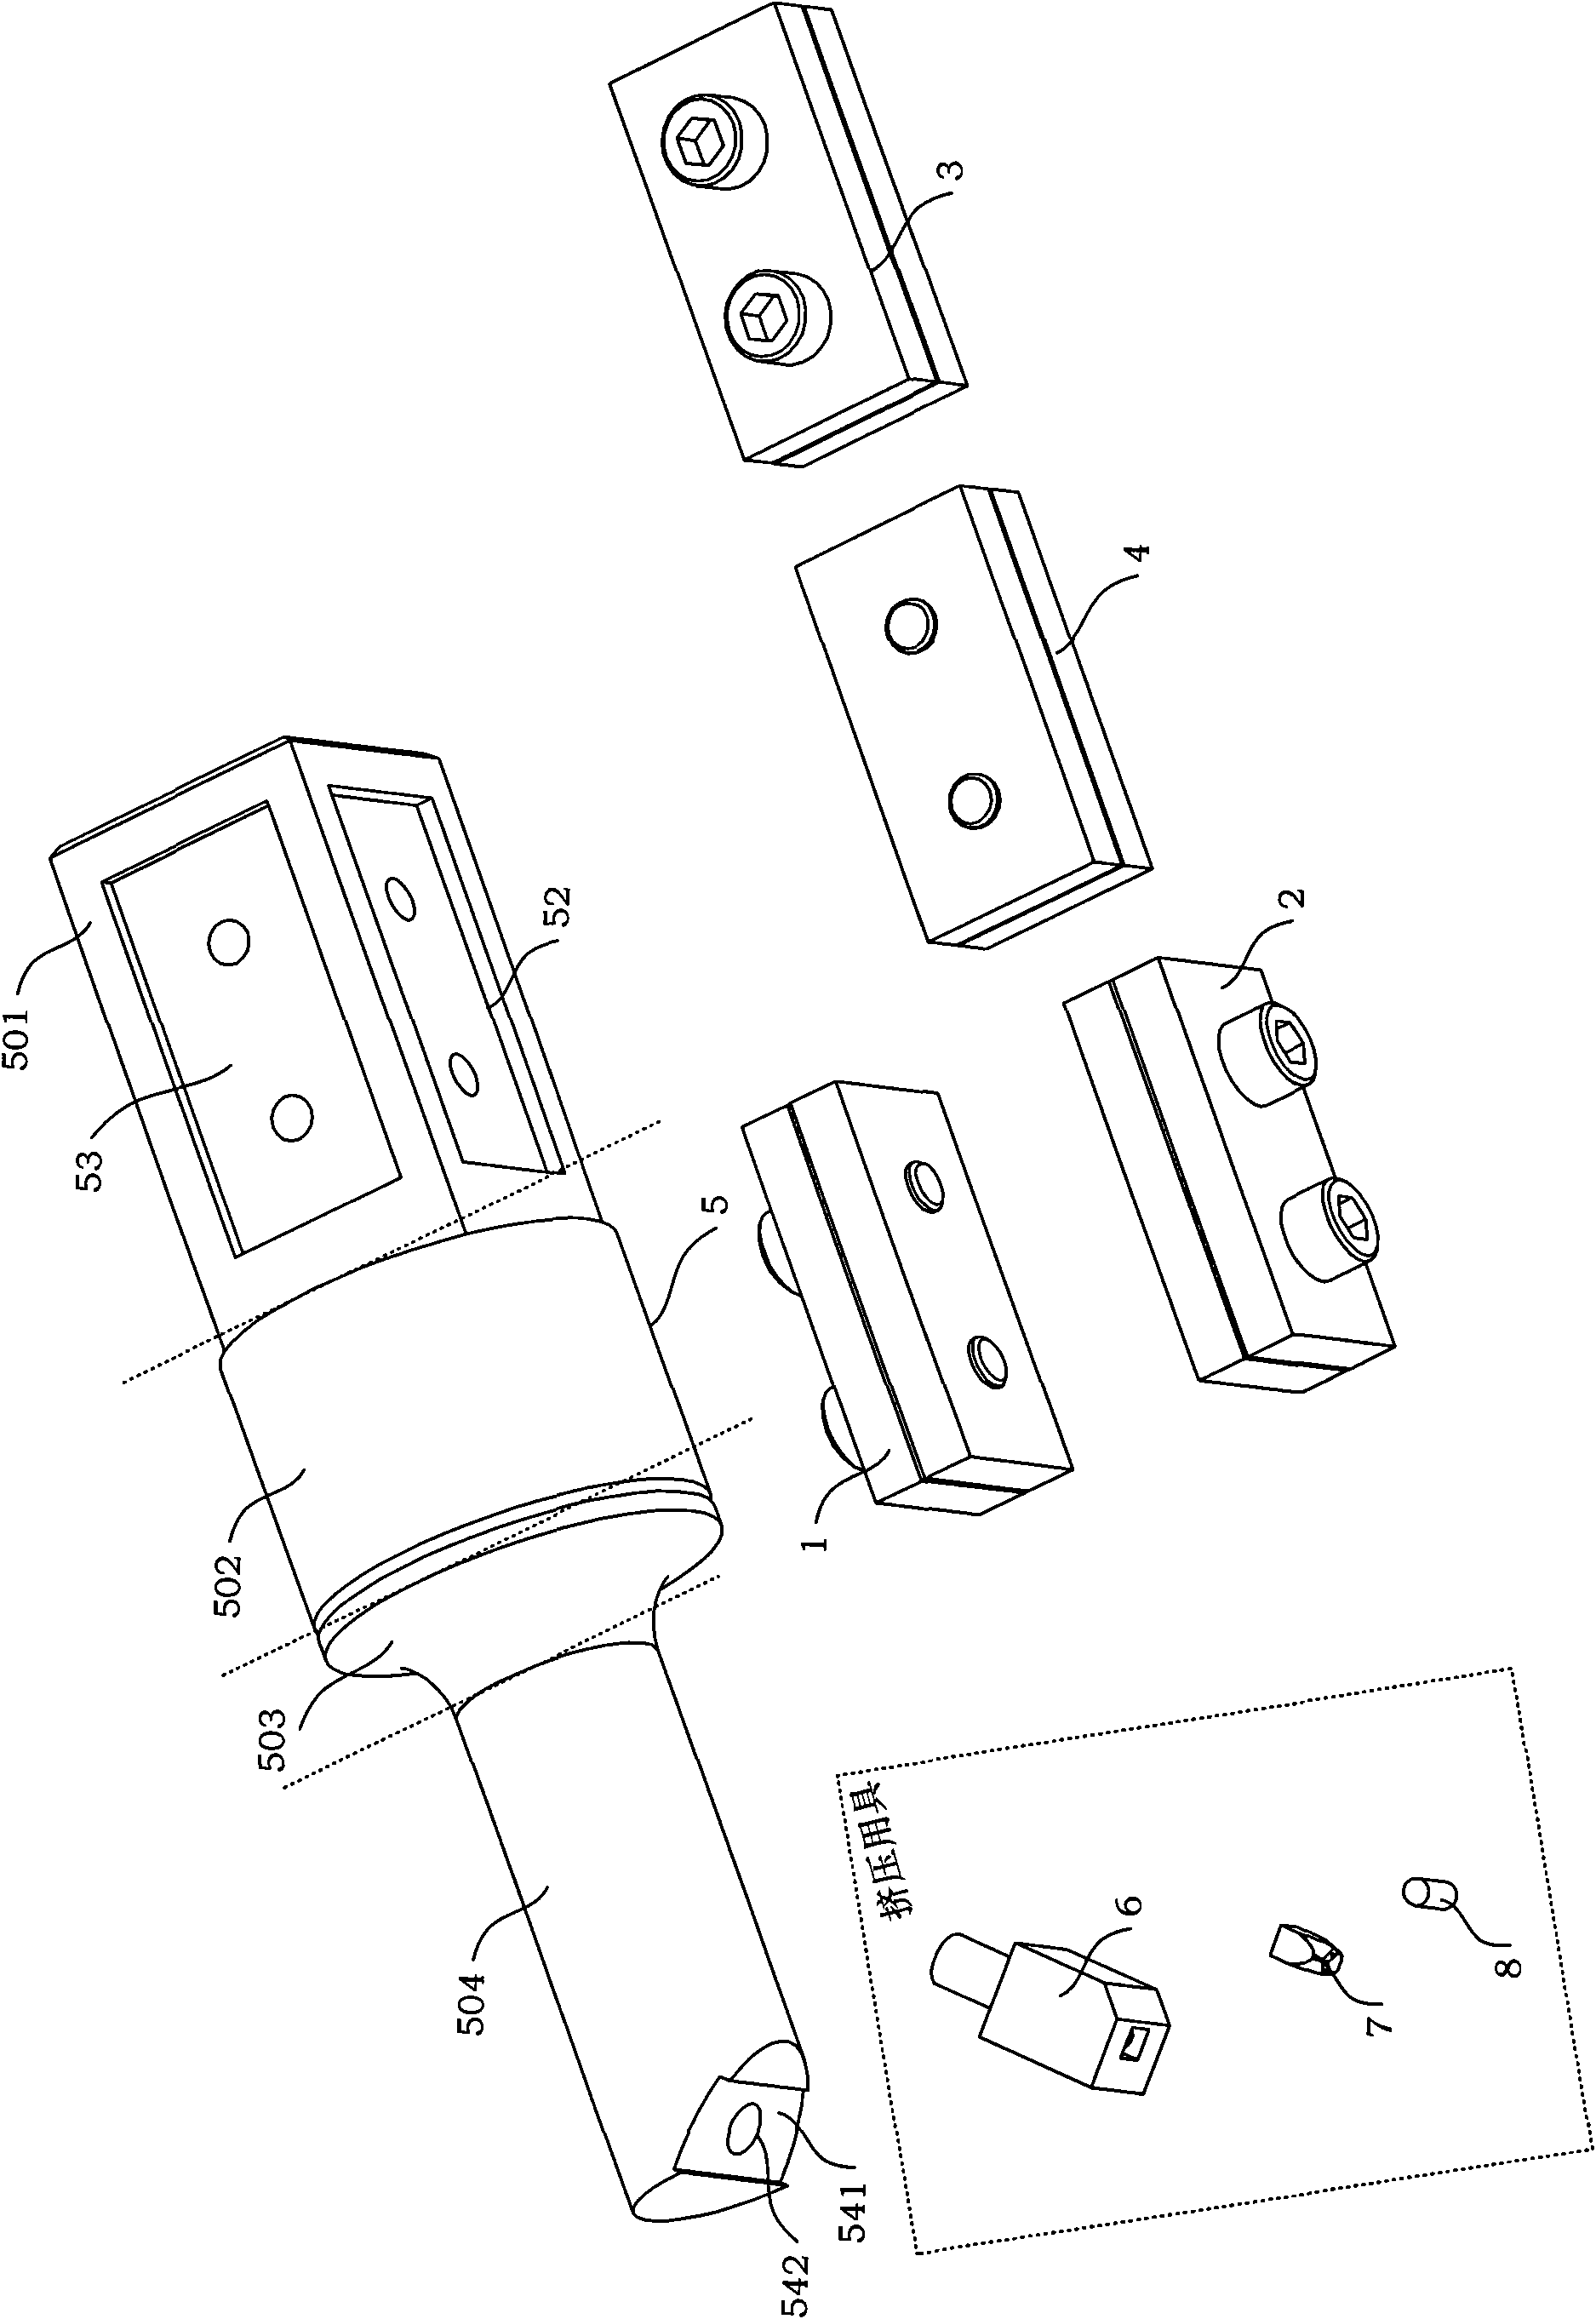 Ultrasonic elliptical vibration extrusion device and vibration extrusion processing method for carrying out surface finishing of part by using same